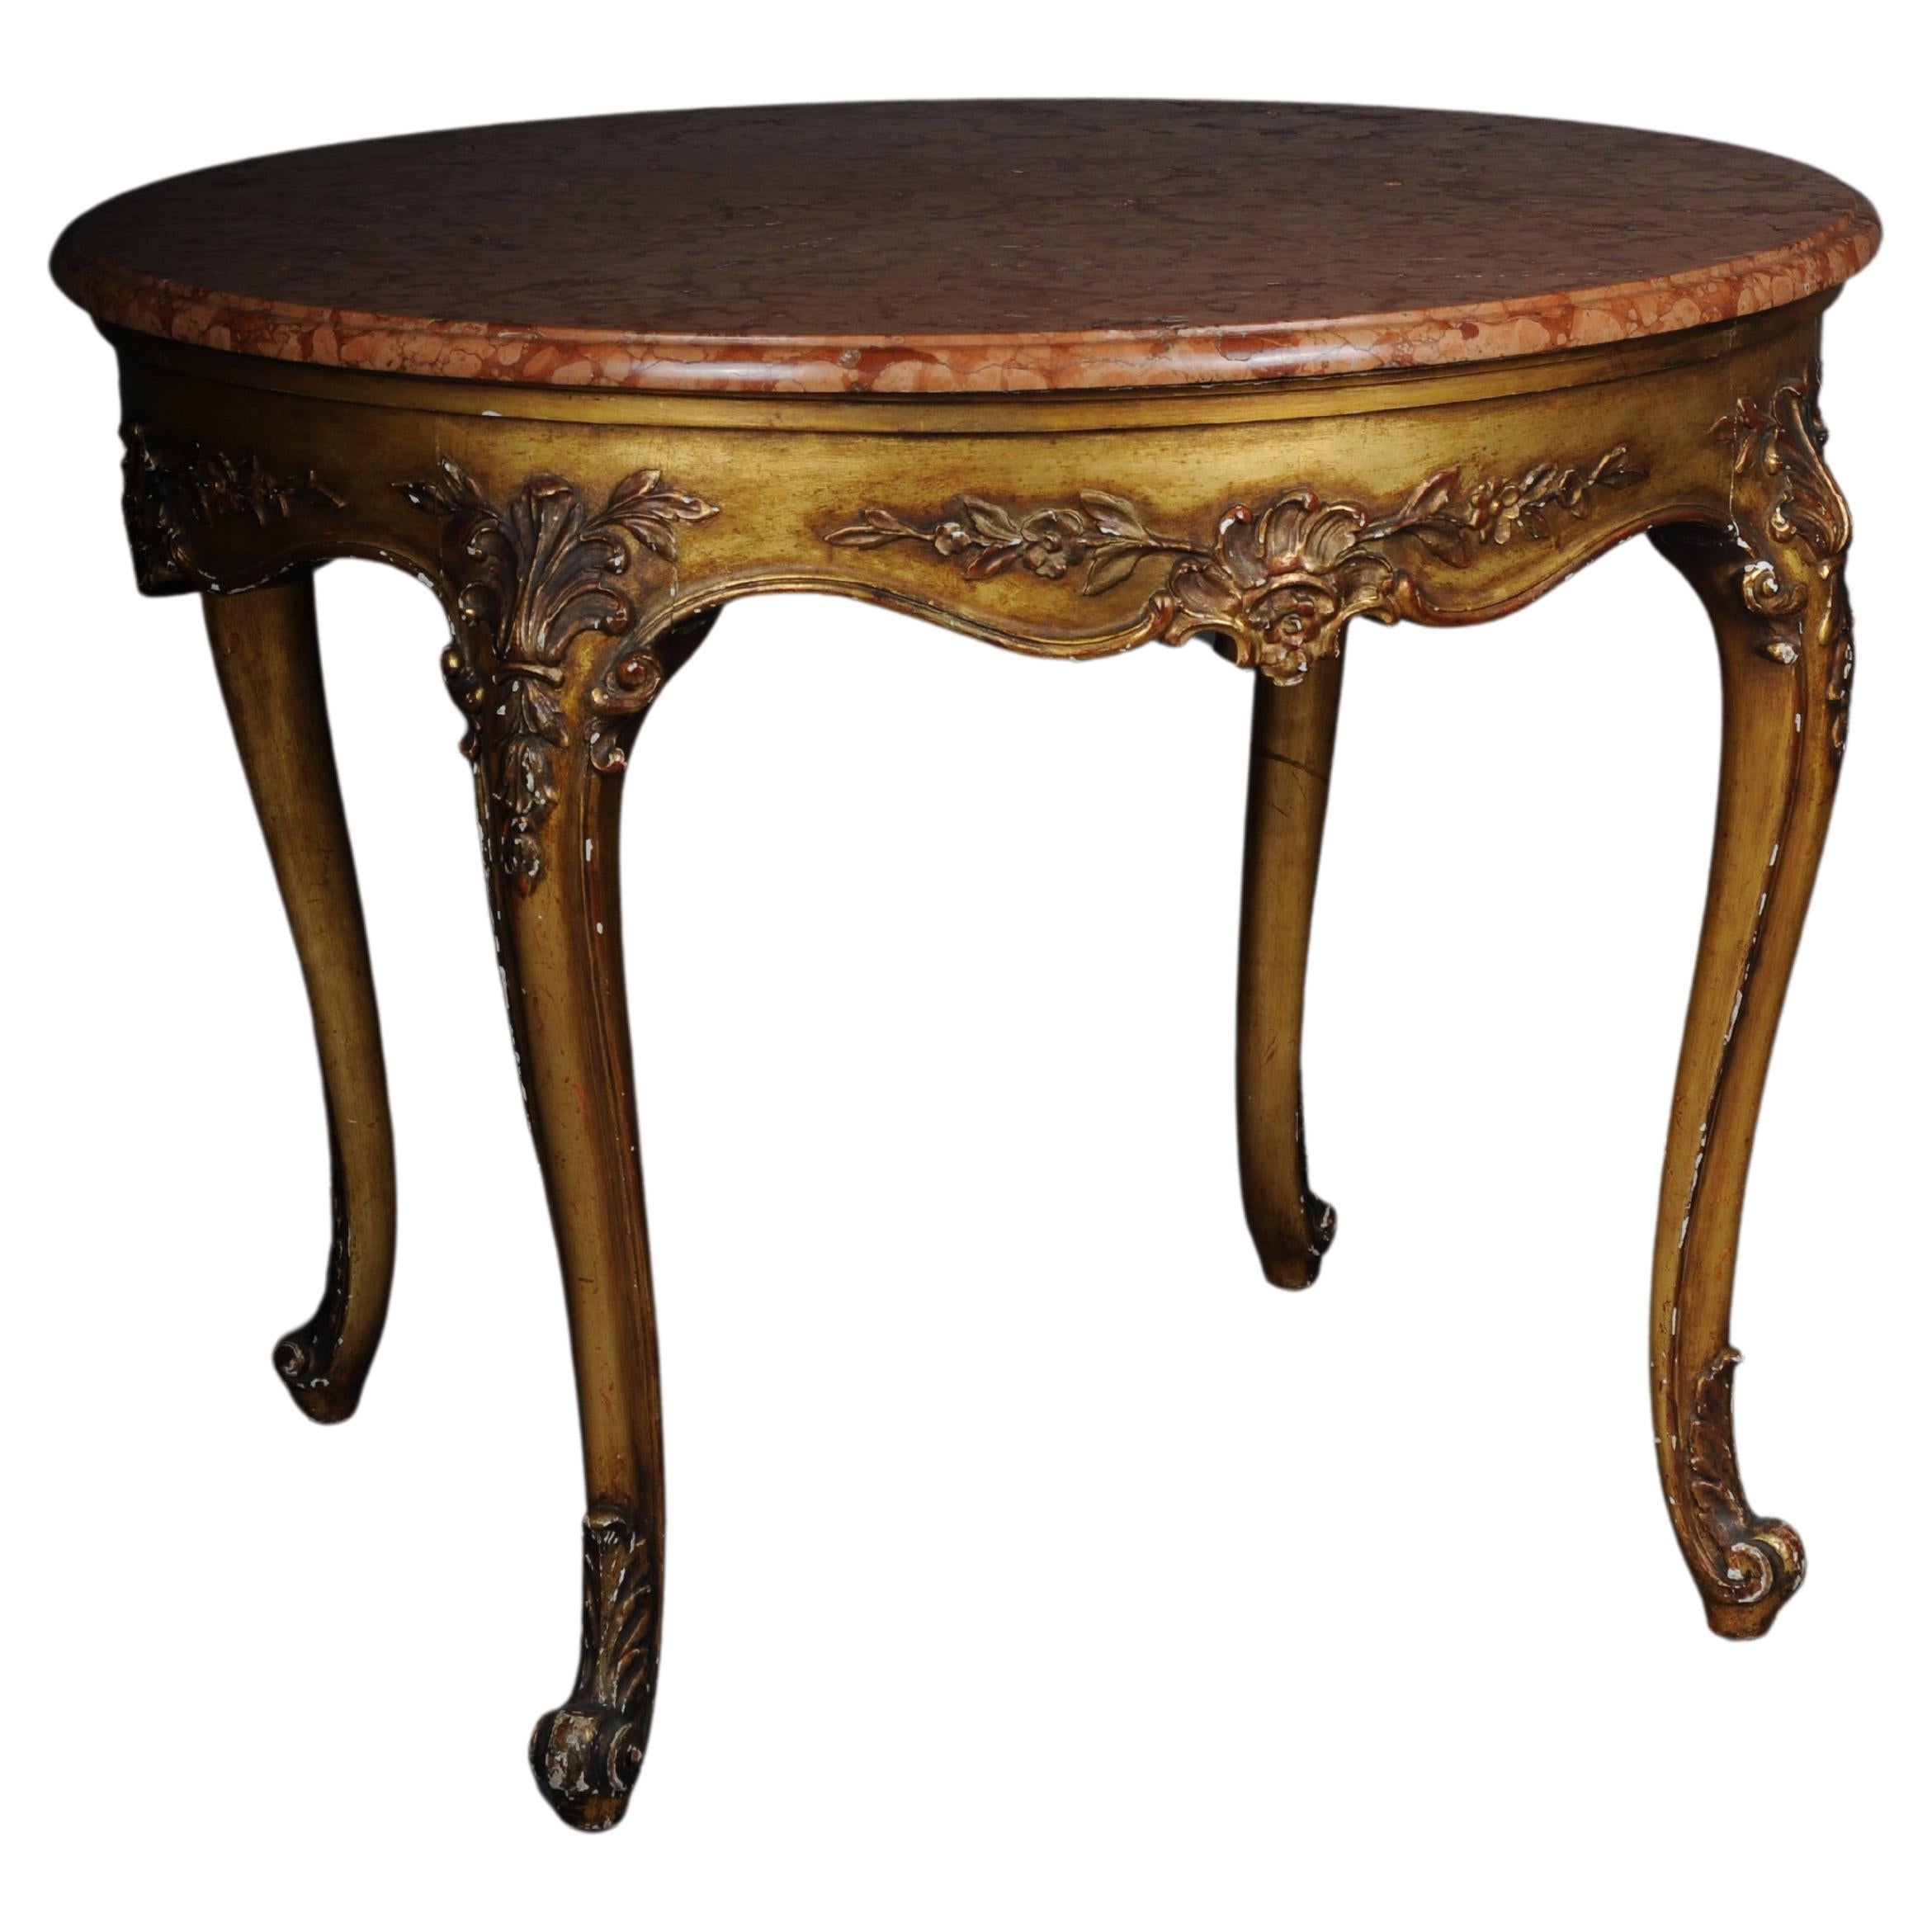 Antique round salon table, Louis XV circa 1900. Gold with marble top

Solid wood body, richly decorated and completely gold-plated. Curved legs with multi-pass curved cornice. France Louis XV style around 1900.
Round, profiled marble slab.

Very